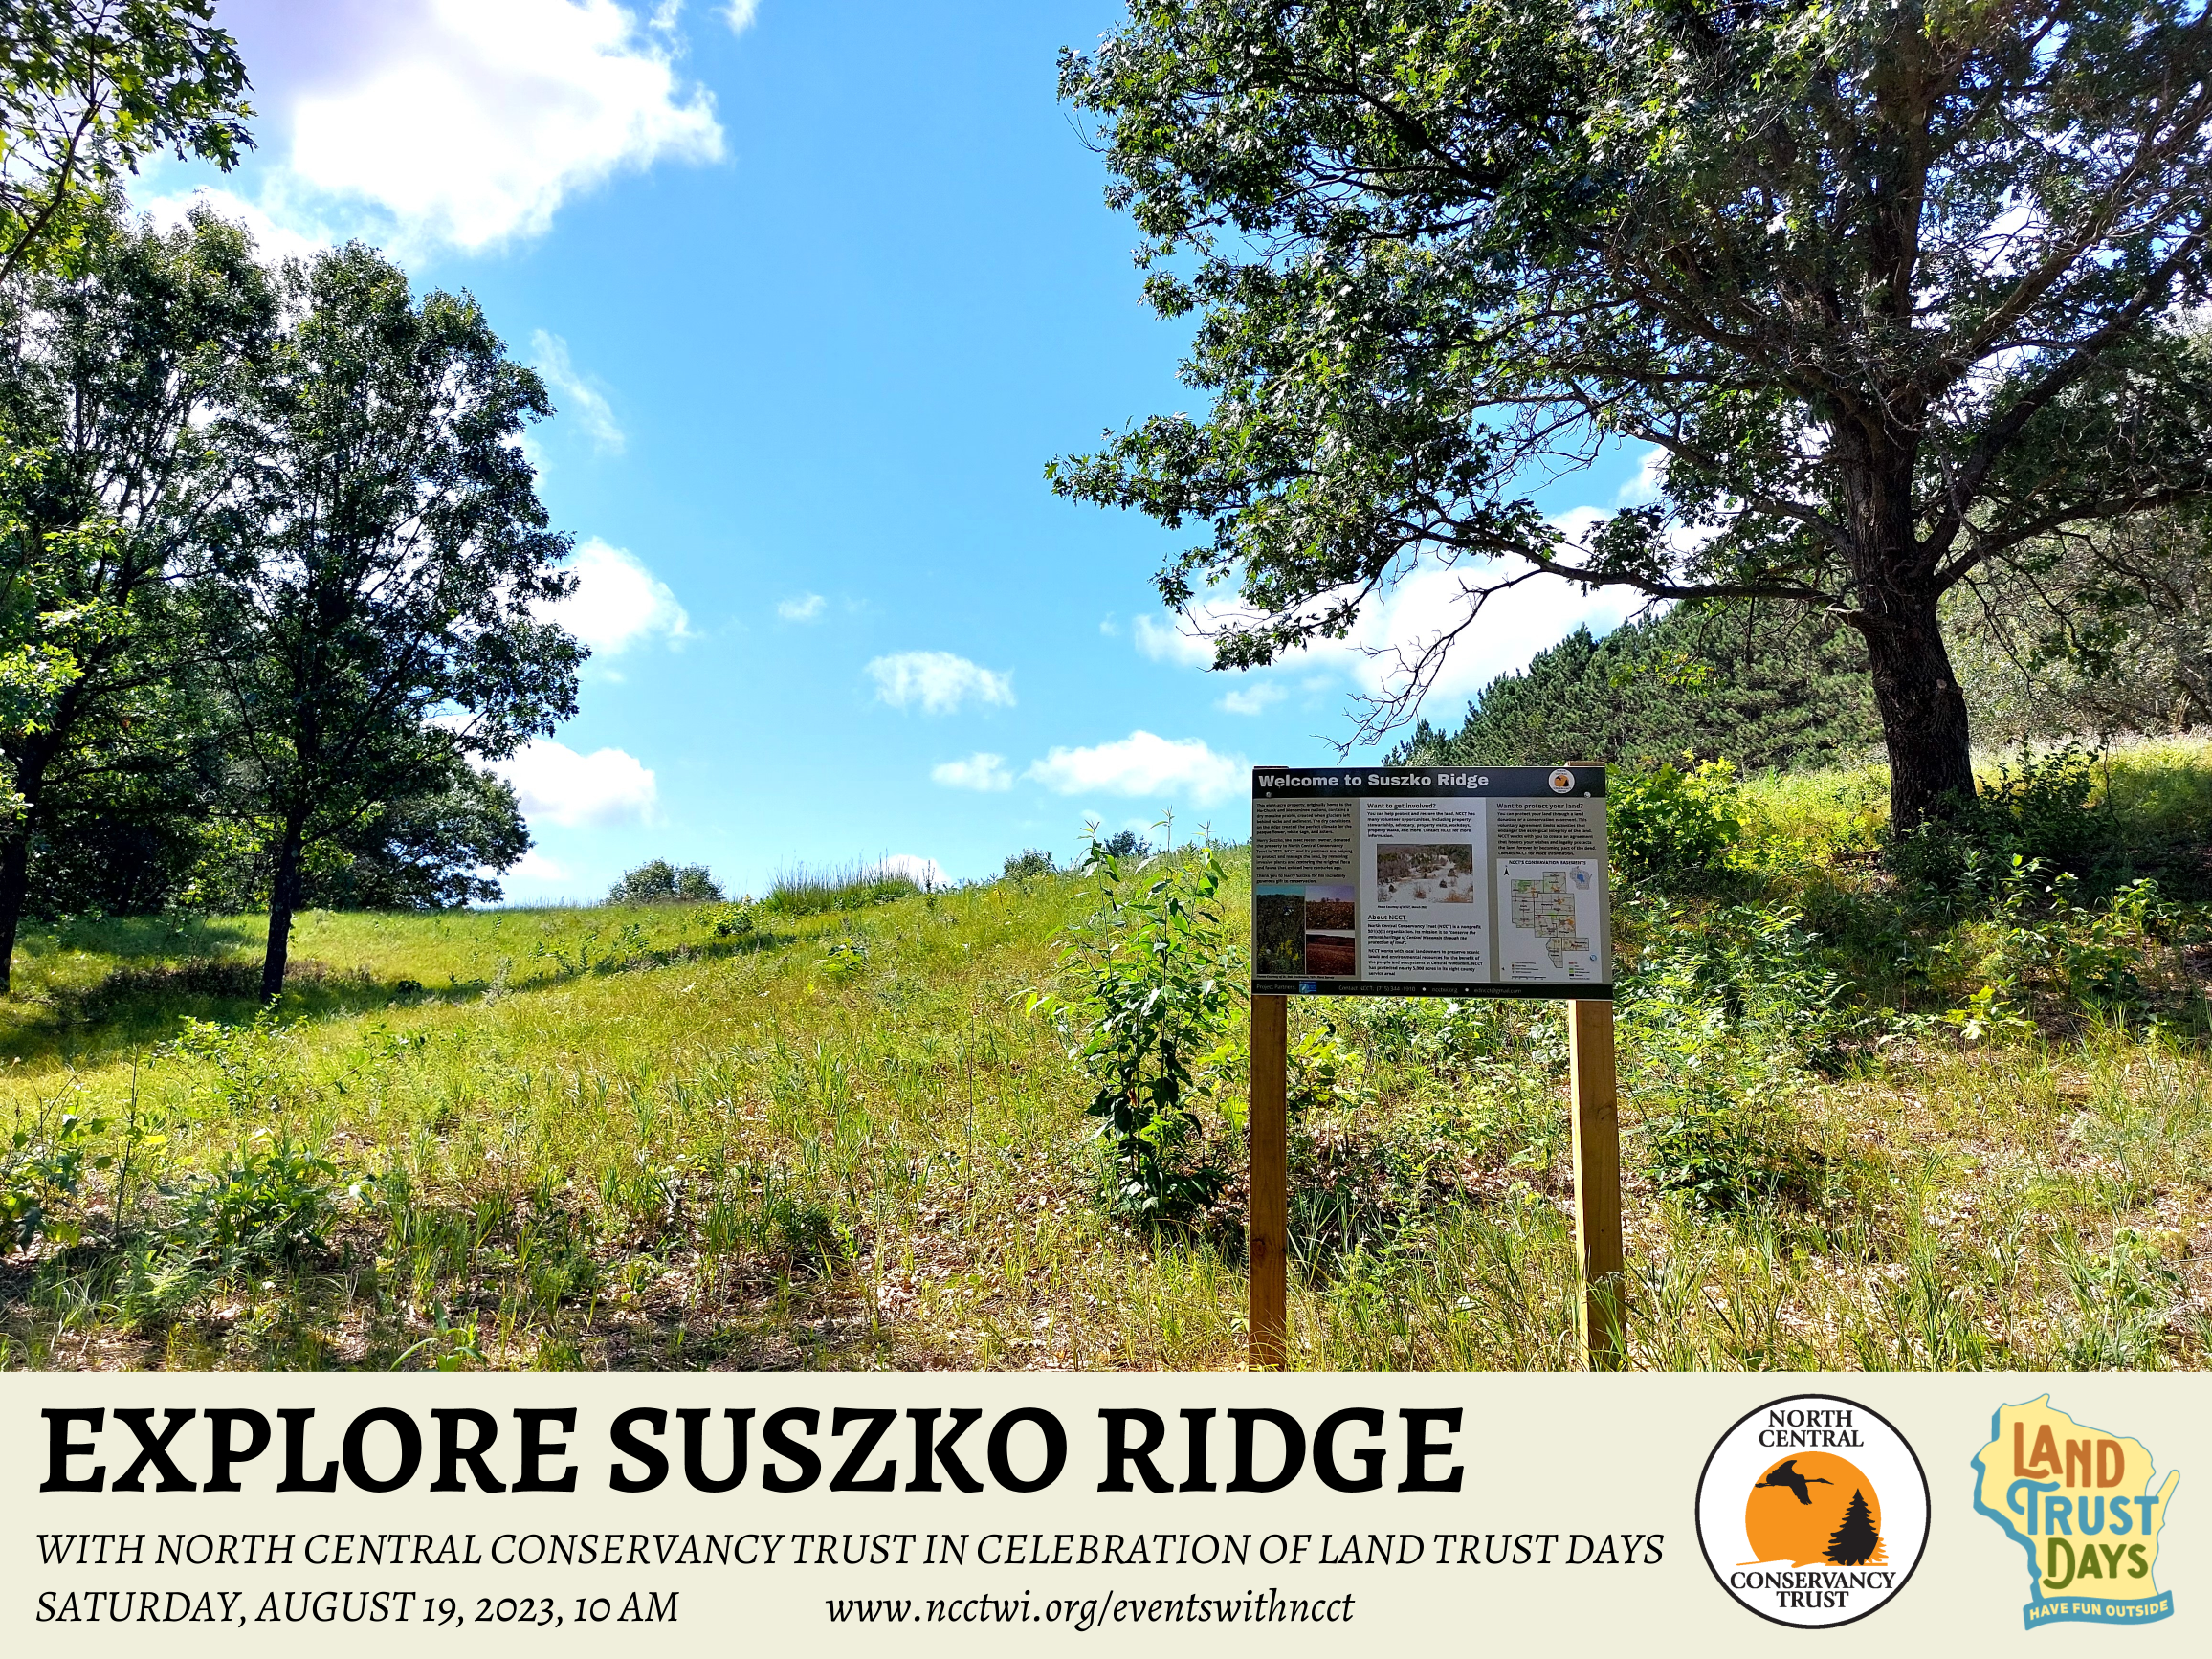 Landscape picture of Suszko Ridge. Grassy area between two trees. Text that reads "Explore Suszko Ridge. With North Central Conservancy Trust in Celebration of Land Trust Days. Saturday, August 19, 2023, 10AM"